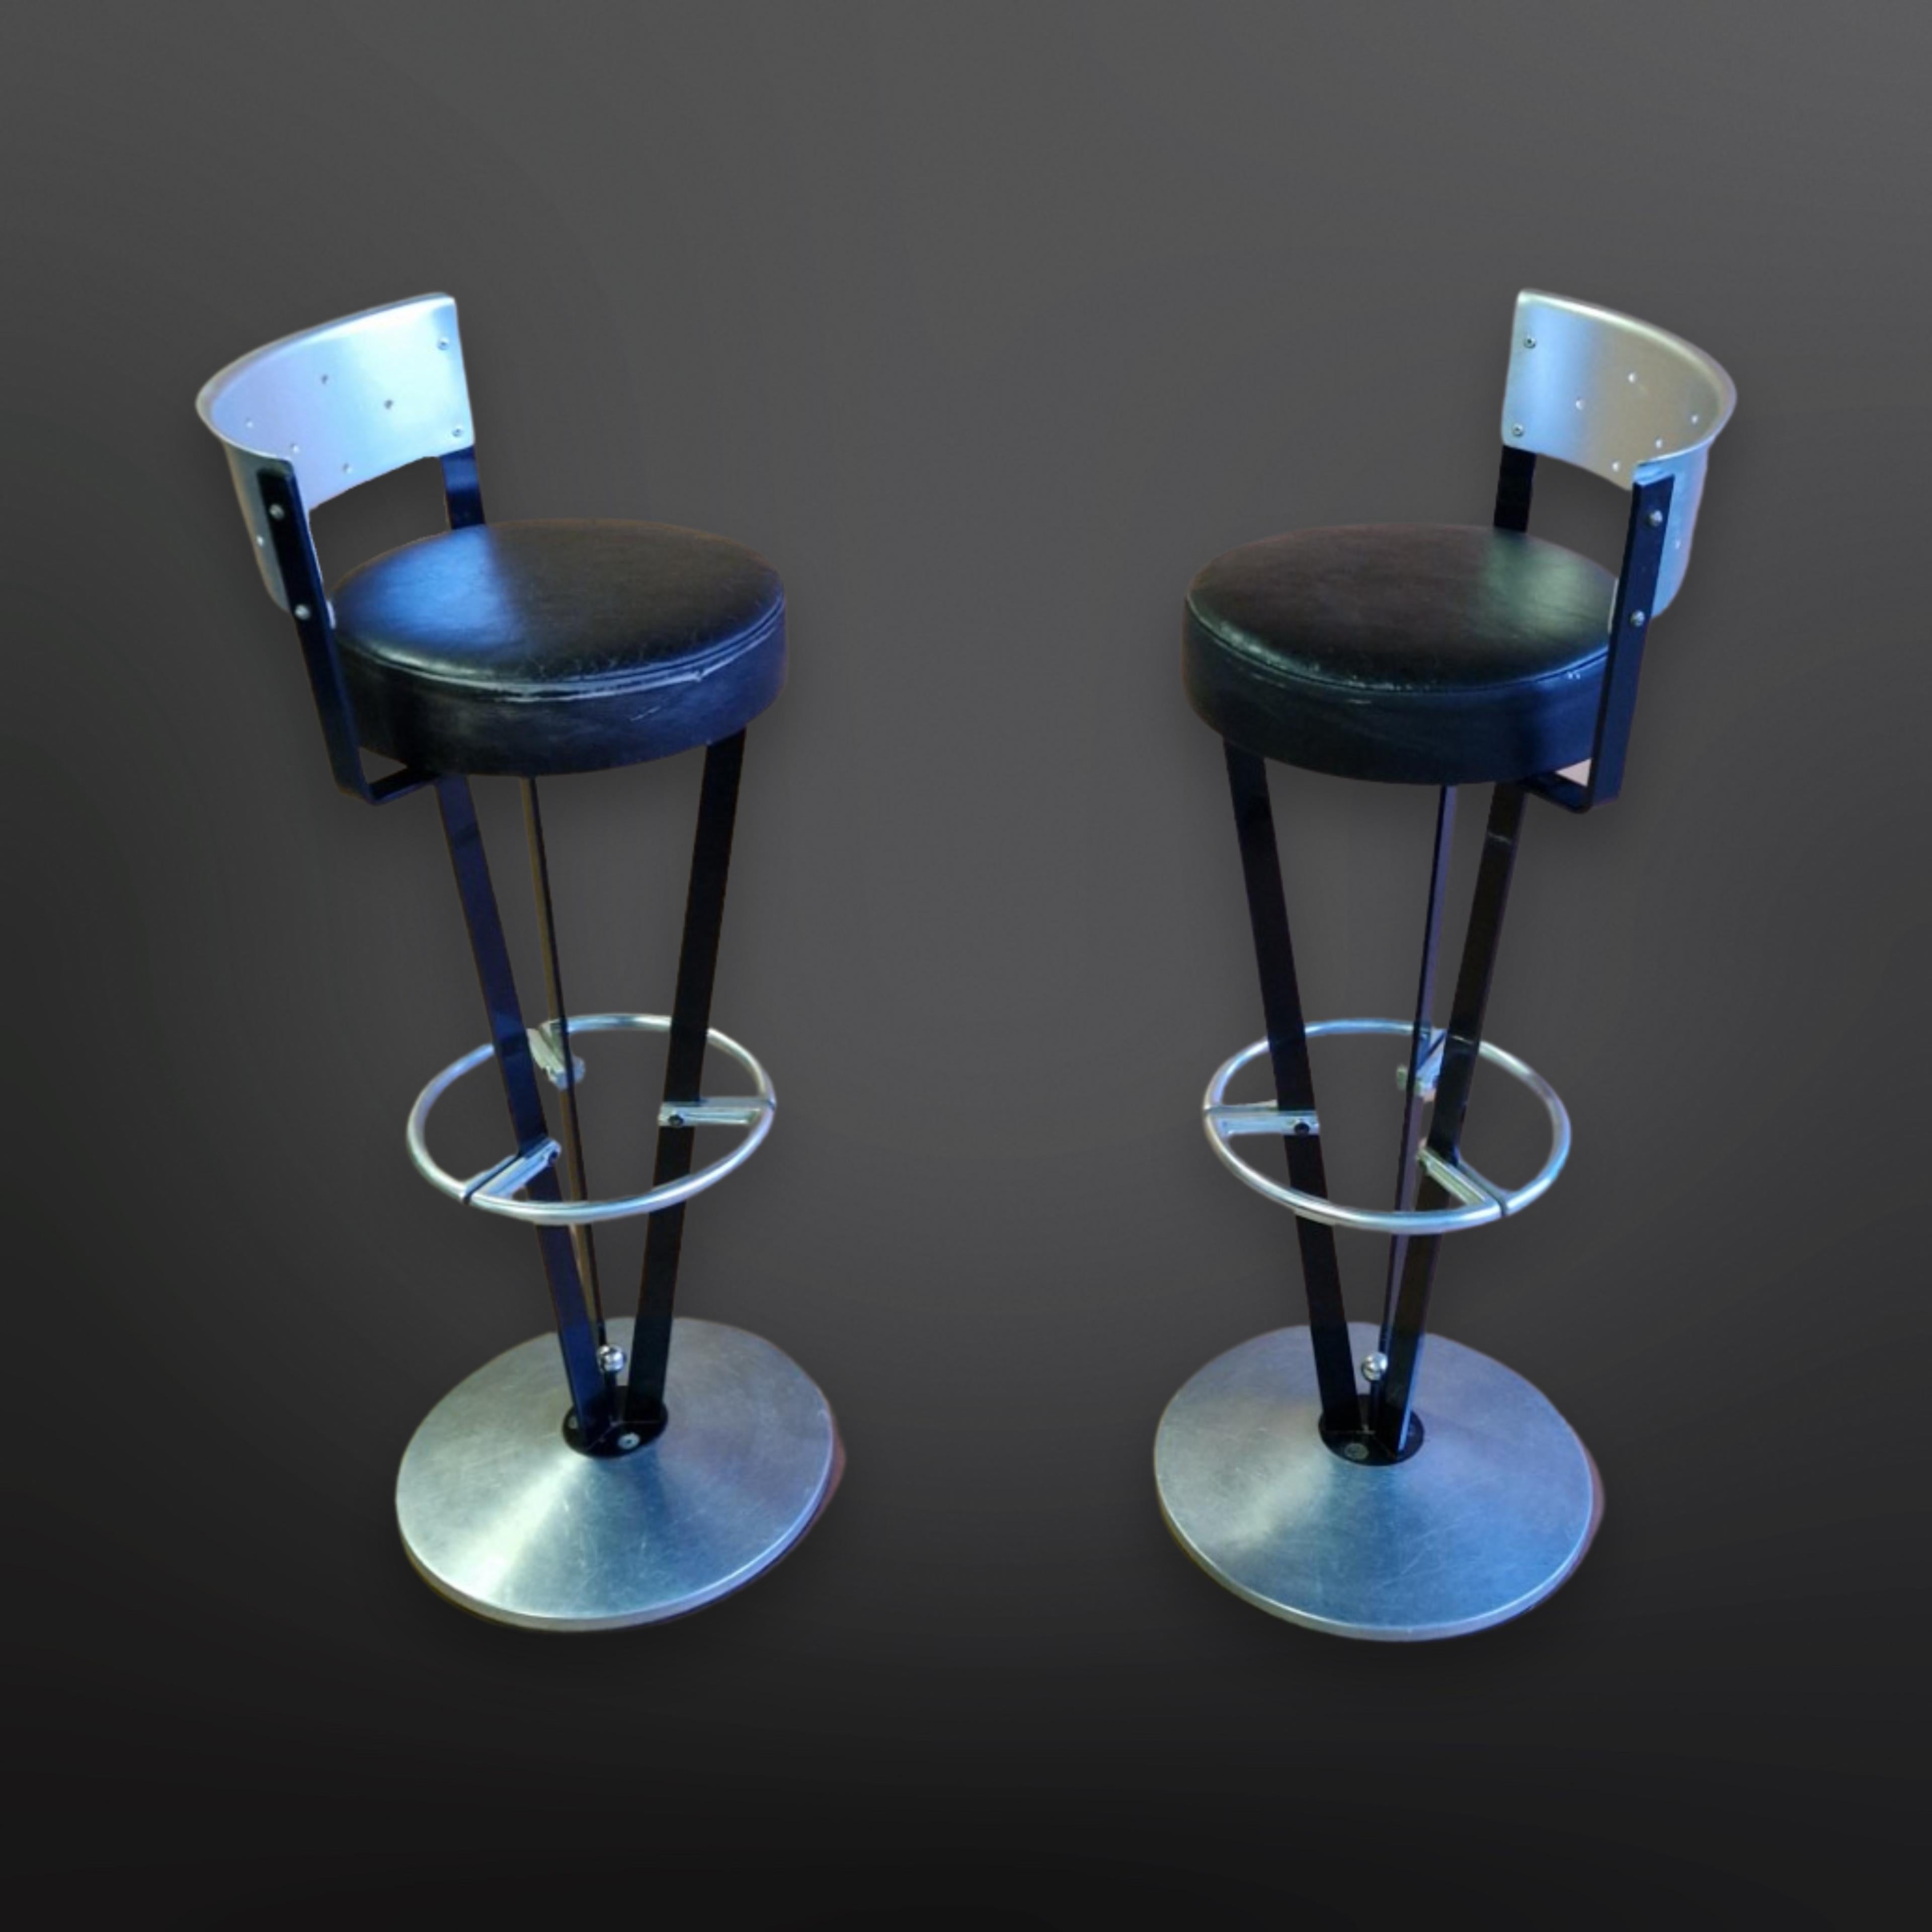 Set of 2 post modern design bar stools. Made from steel, aluminium and leather. The seat height measures 79cm and the height of the backrest is 95cm. Good vintage condition with user marks and a patina consistent with age and use. Designed in the